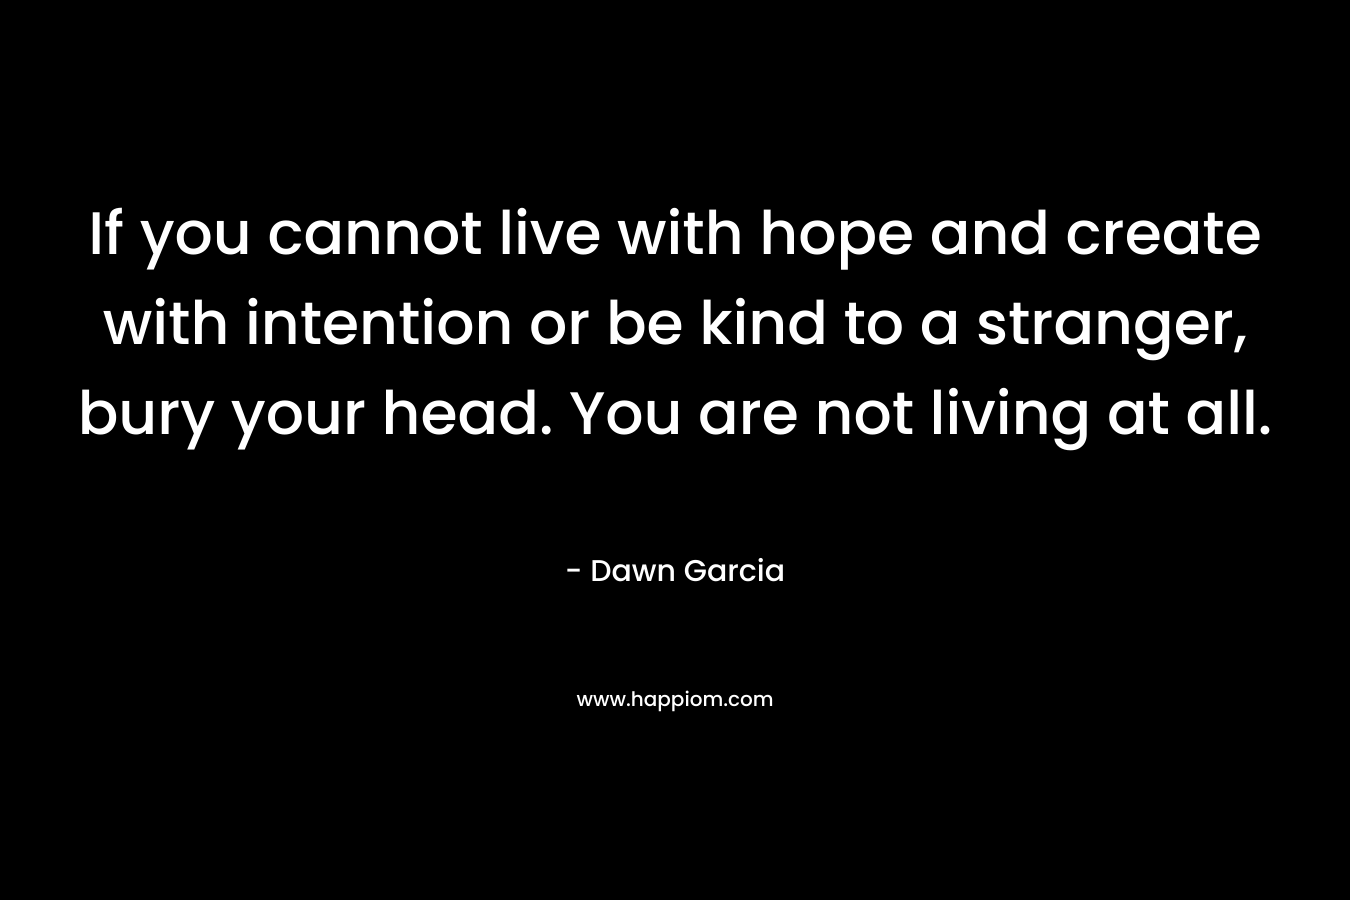 If you cannot live with hope and create with intention or be kind to a stranger, bury your head. You are not living at all.